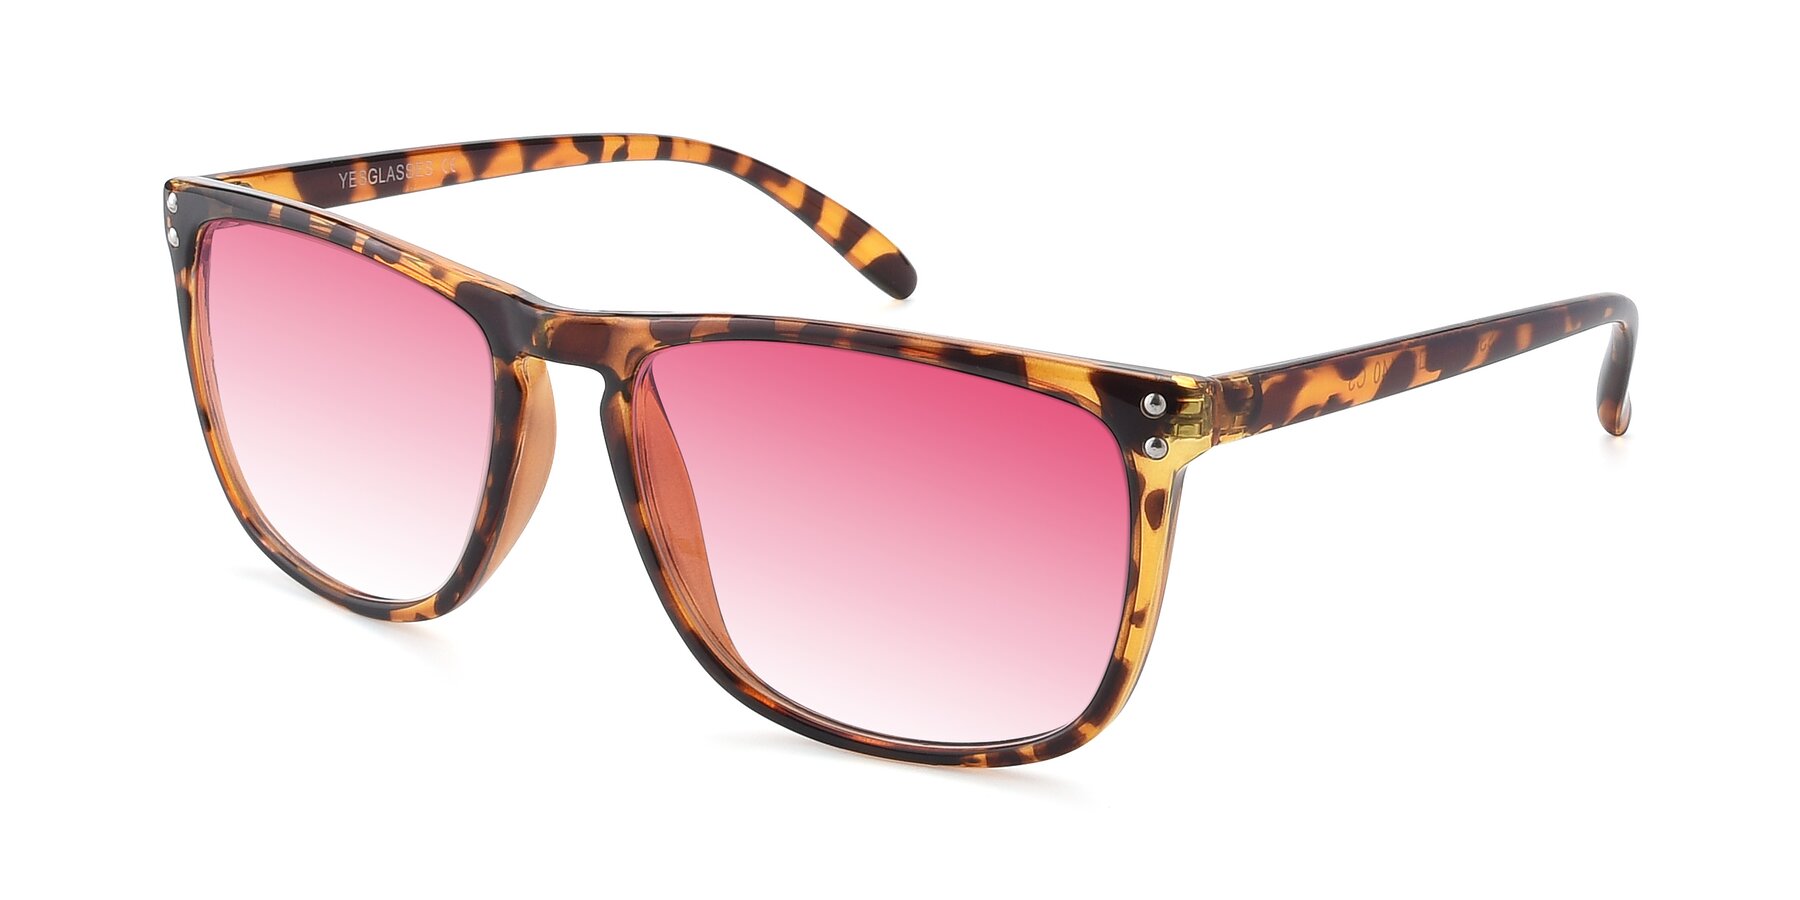 Angle of SSR411 in Translucent Orange Tortoise with Pink Gradient Lenses